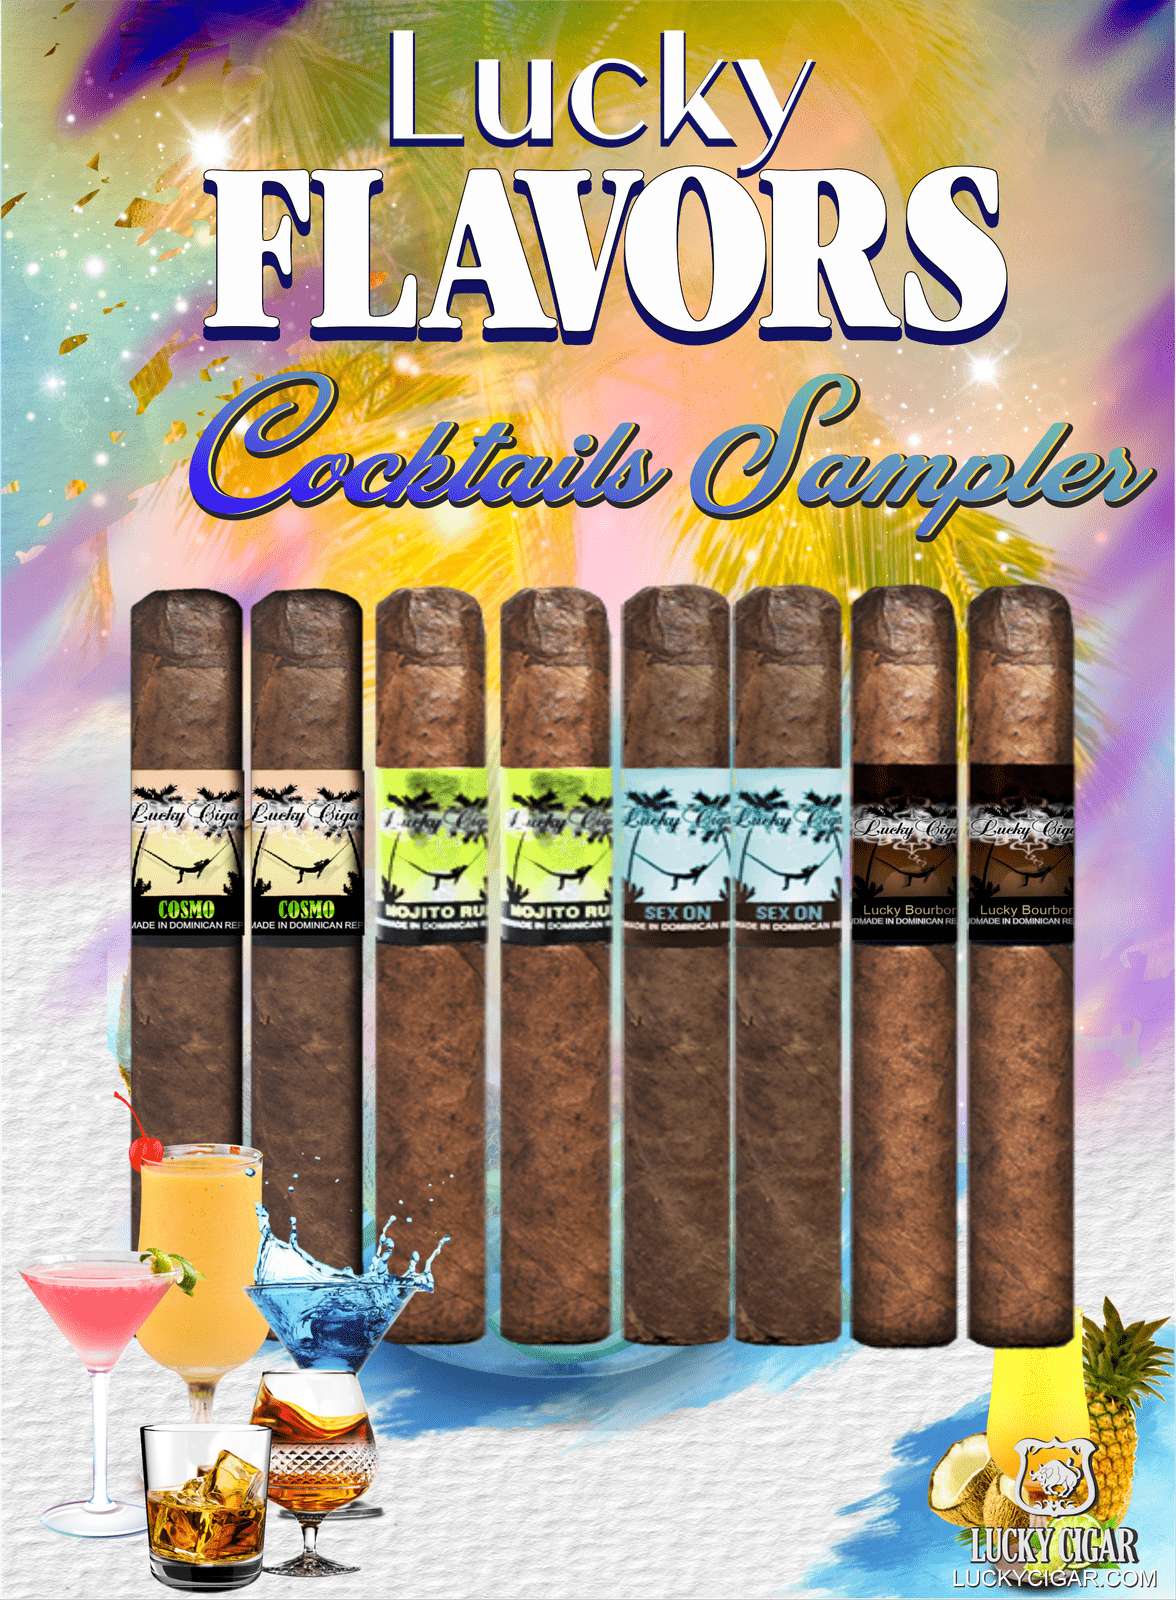 Flavored Cigars: Lucky Flavors 8 Piece Cocktails Sampler